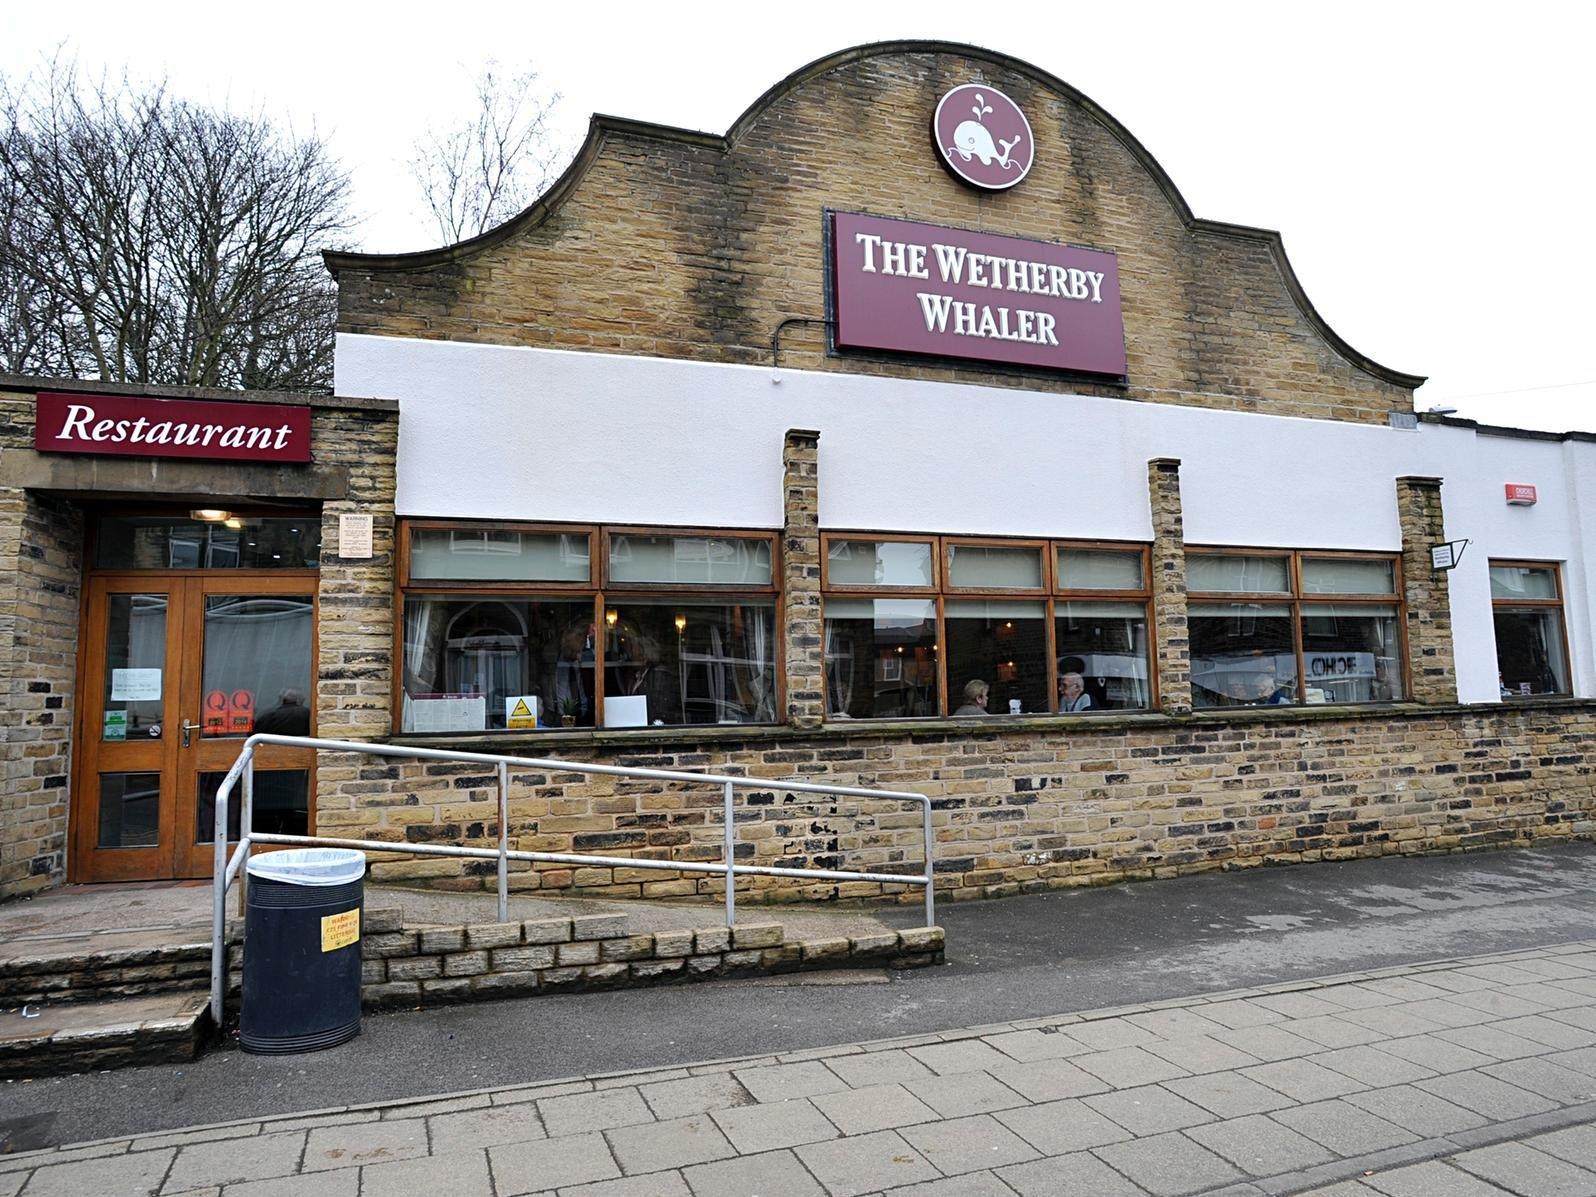 The Pudsey branch of the Wetherby Whaler bags the tenth spot. The chippy is described as "right proper fish & chips".